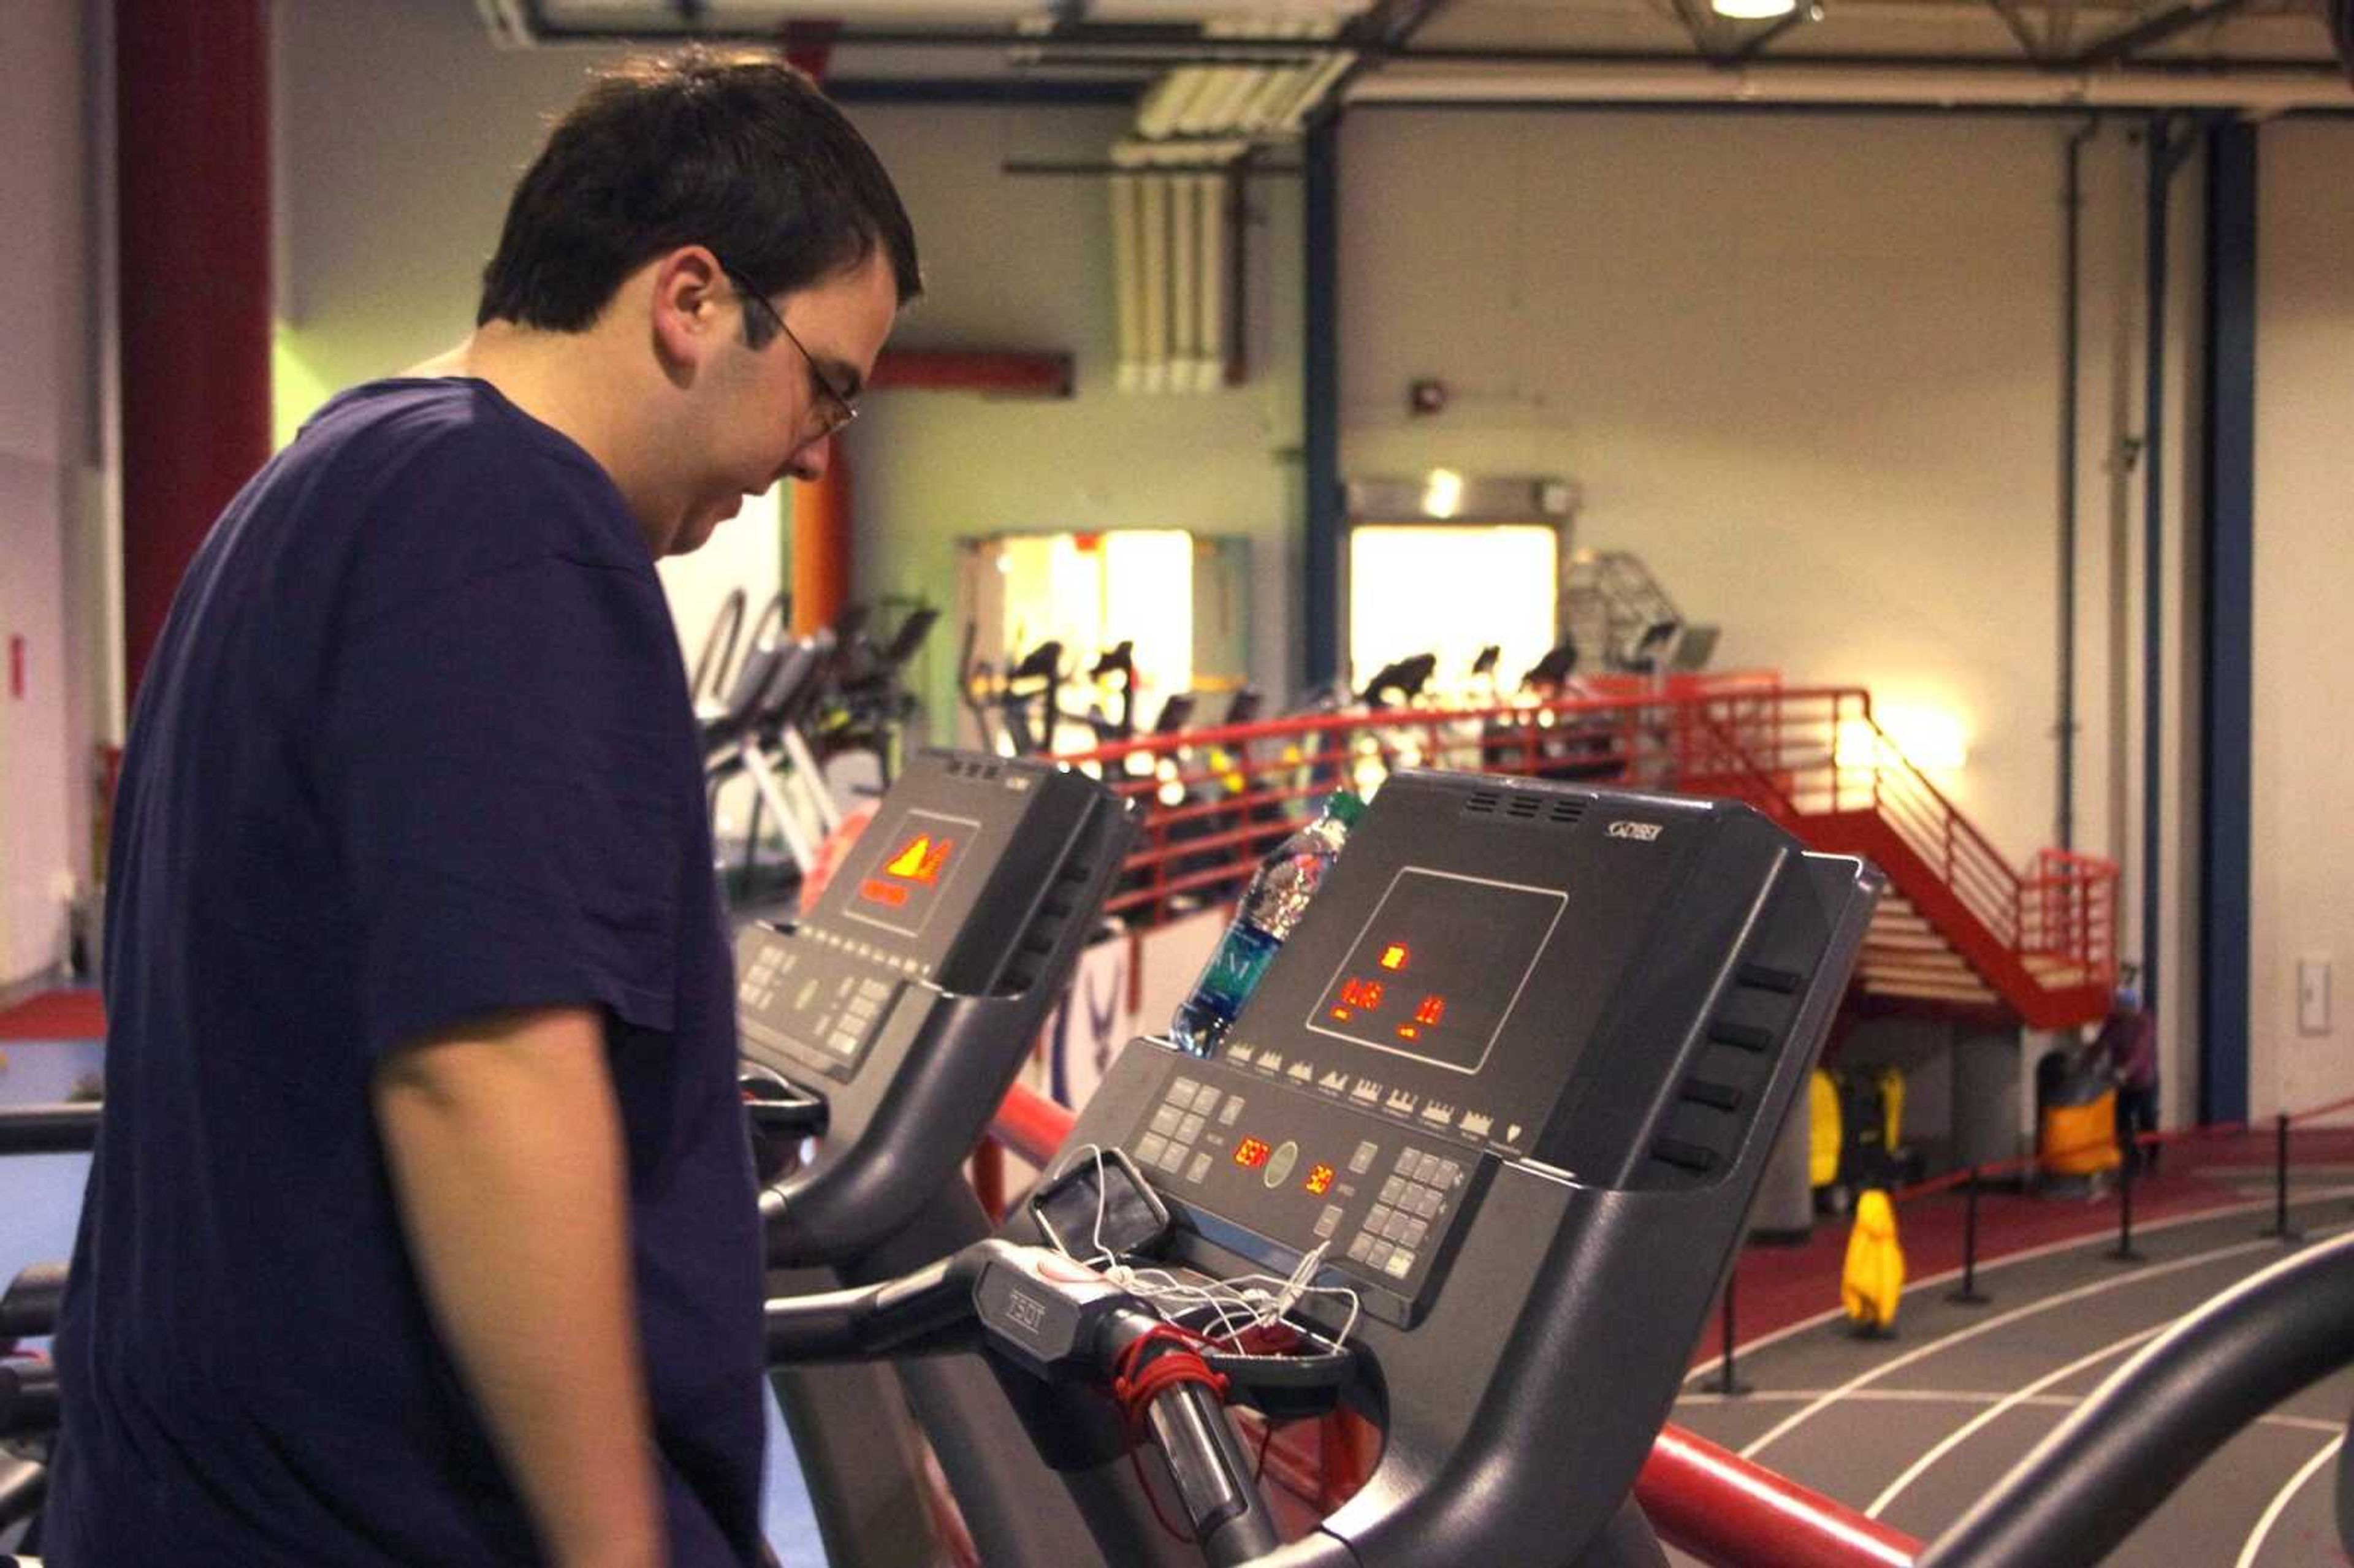 Hall director getting fit in the new year, hopes to inspire others with blog